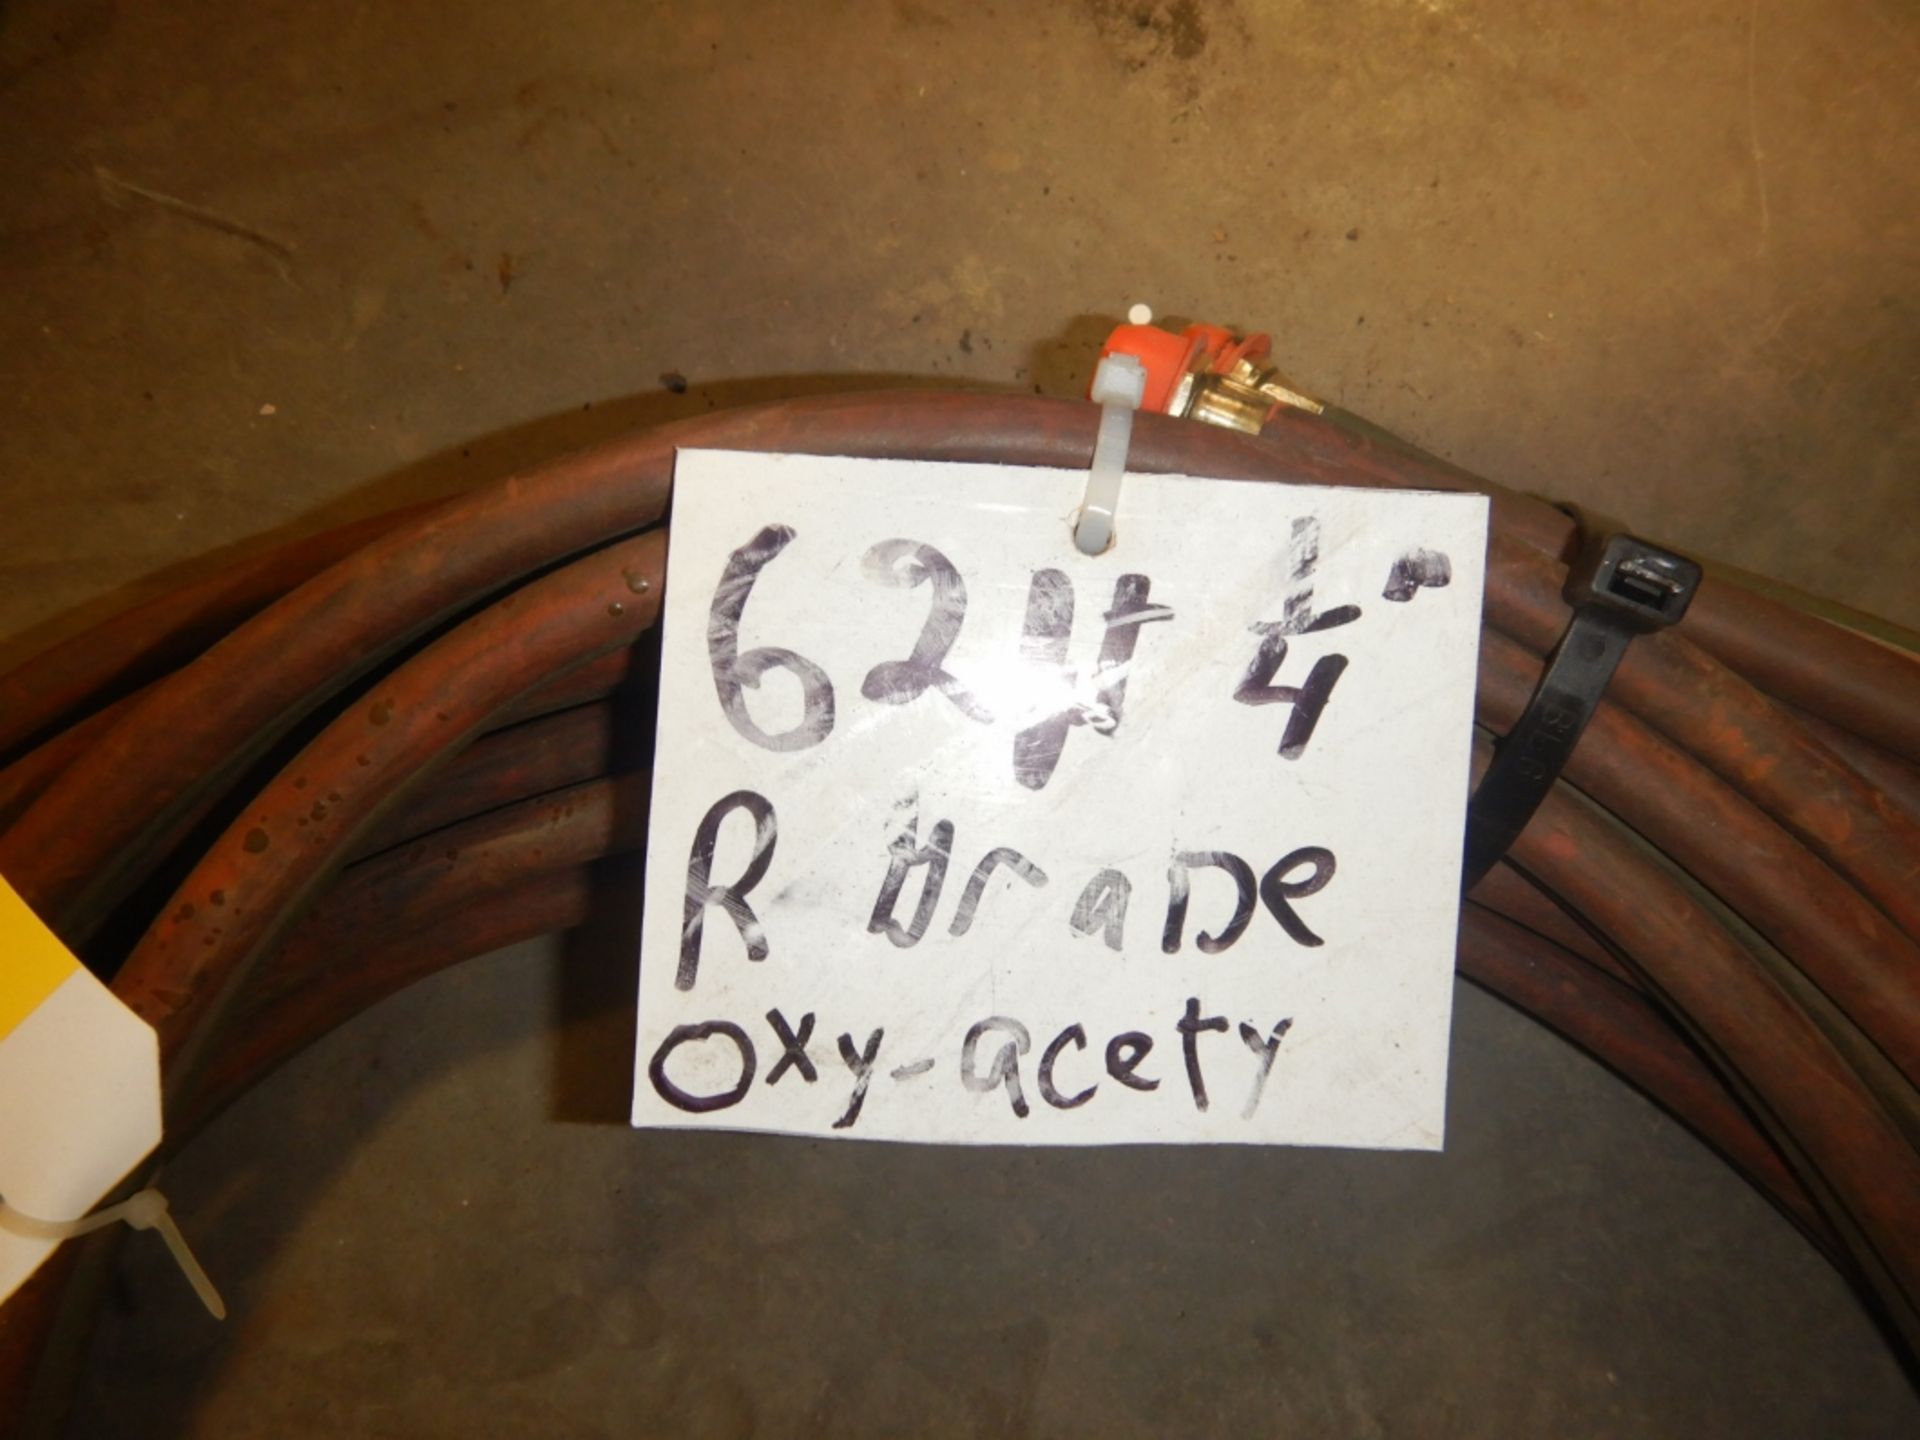 62FT 1/4 INCH R GRADE OXY/ACC HOSE - Image 3 of 3